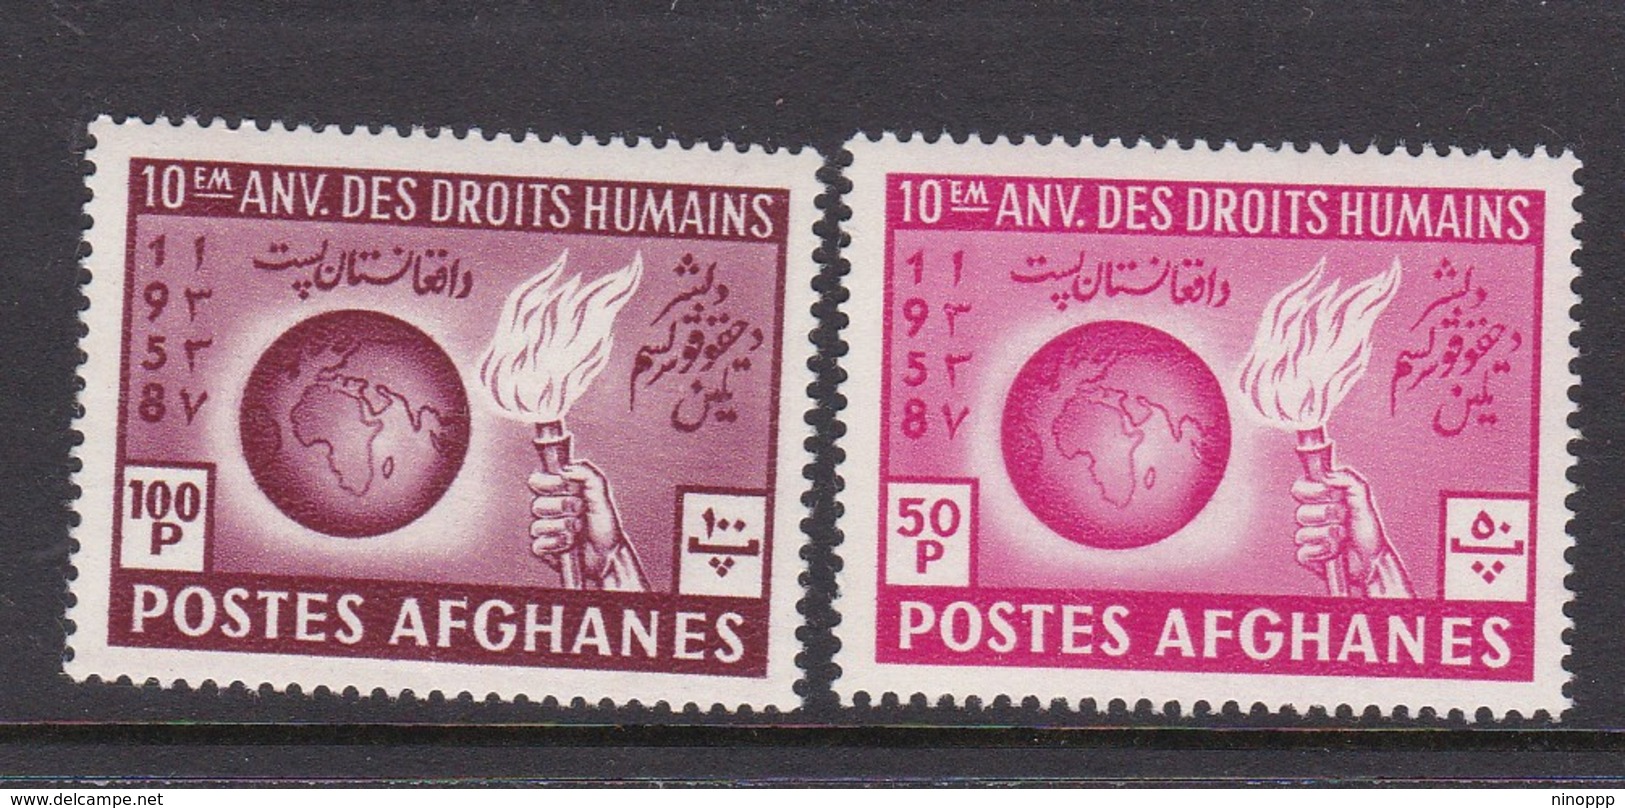 Afghanistan SG 443-444 1958 10th Anniversary Declaration Human Rights MNH - Afghanistan